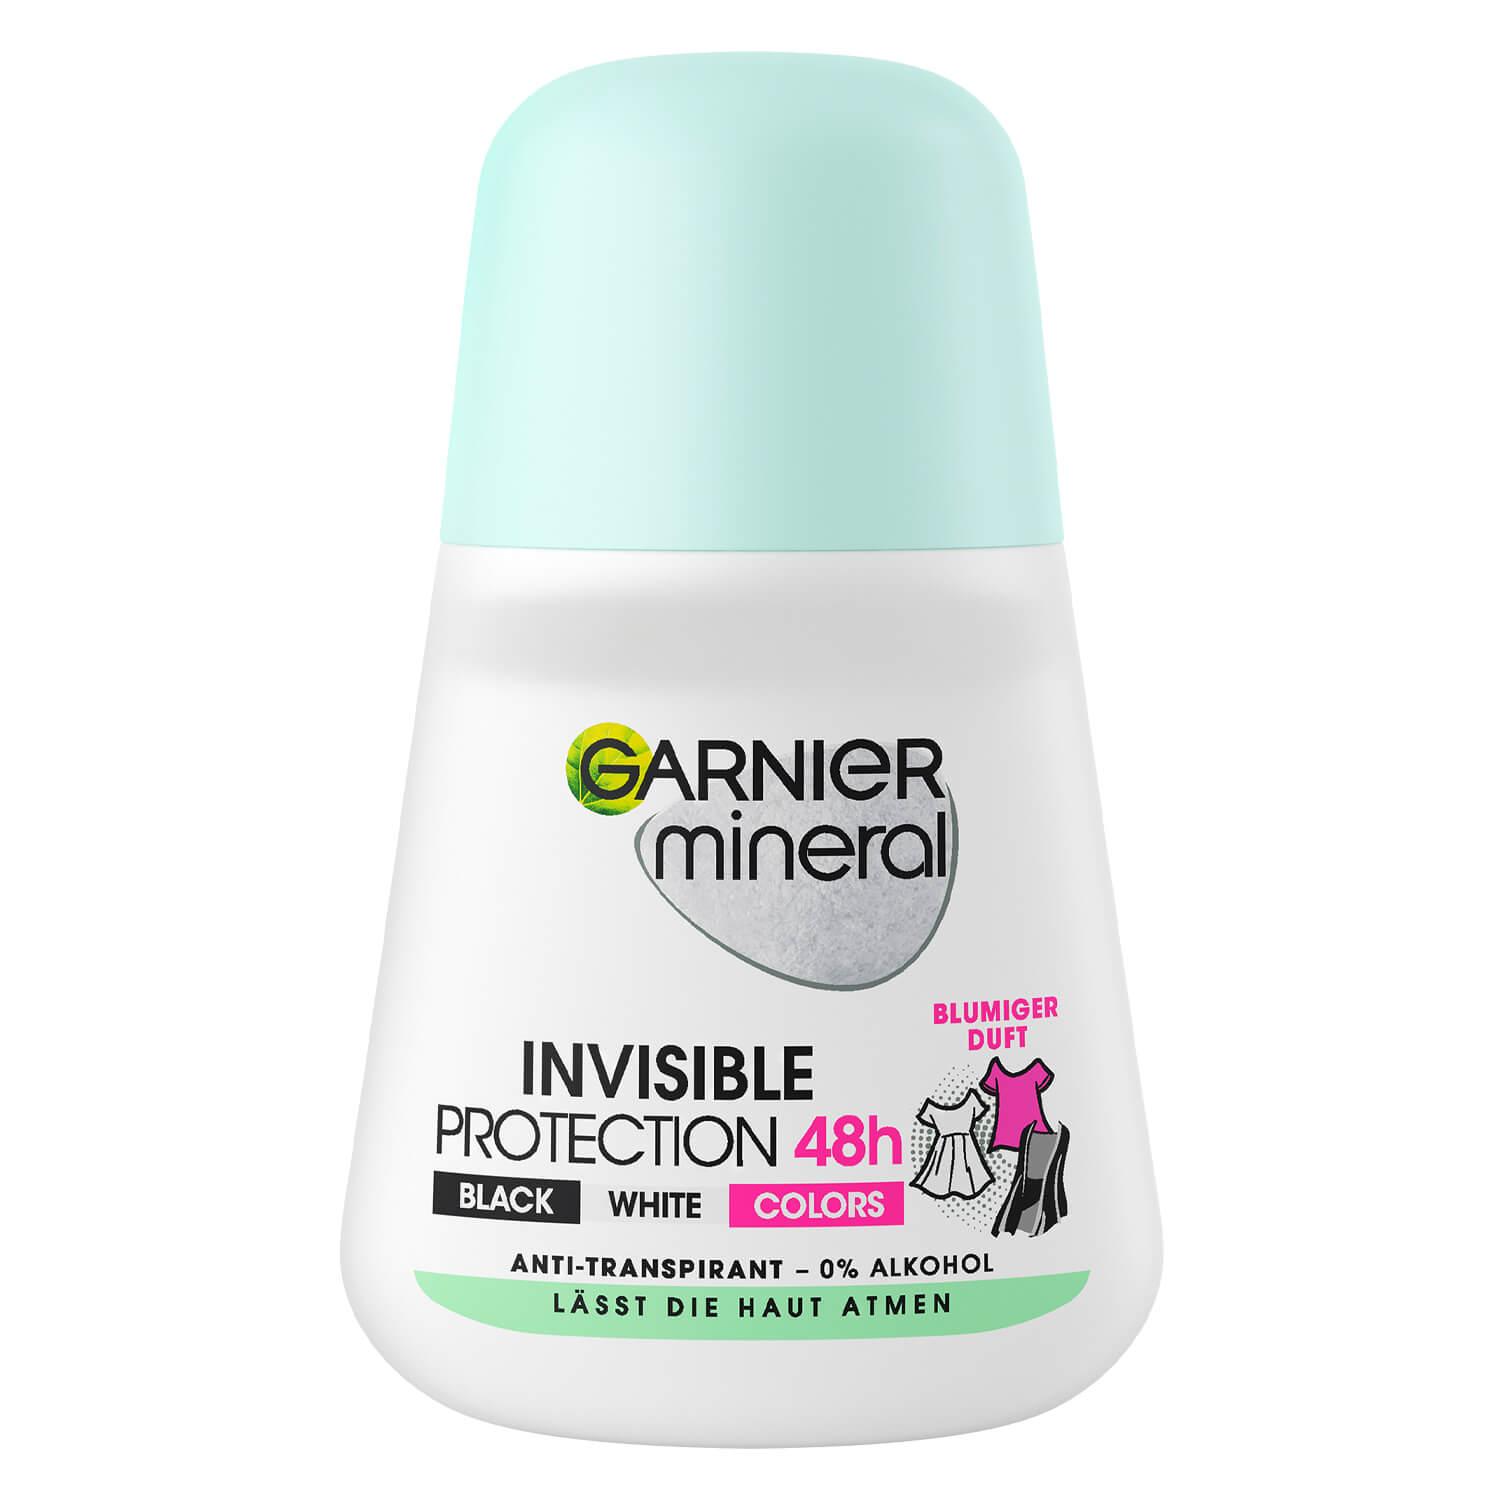 Garnier Mineral - Invisible Black, White & Colors Roll-on